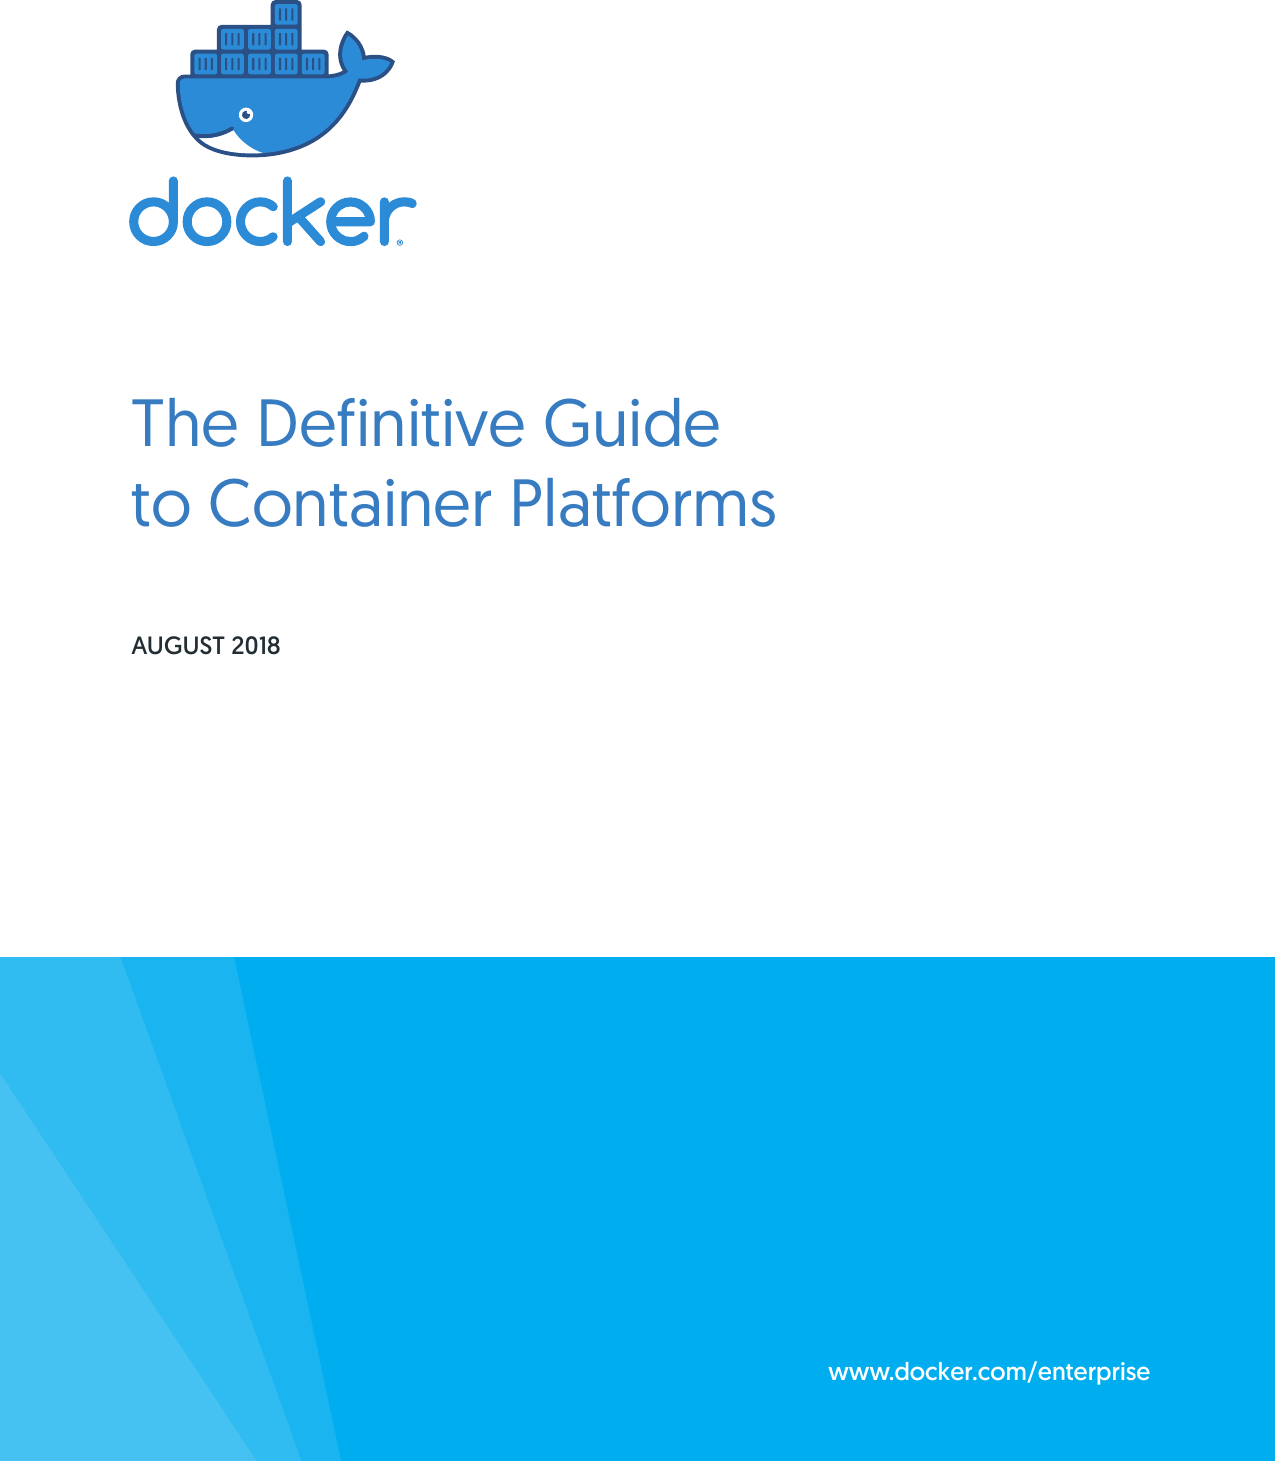 Page 1 of 12 - Definitive Guide Docker 10202016